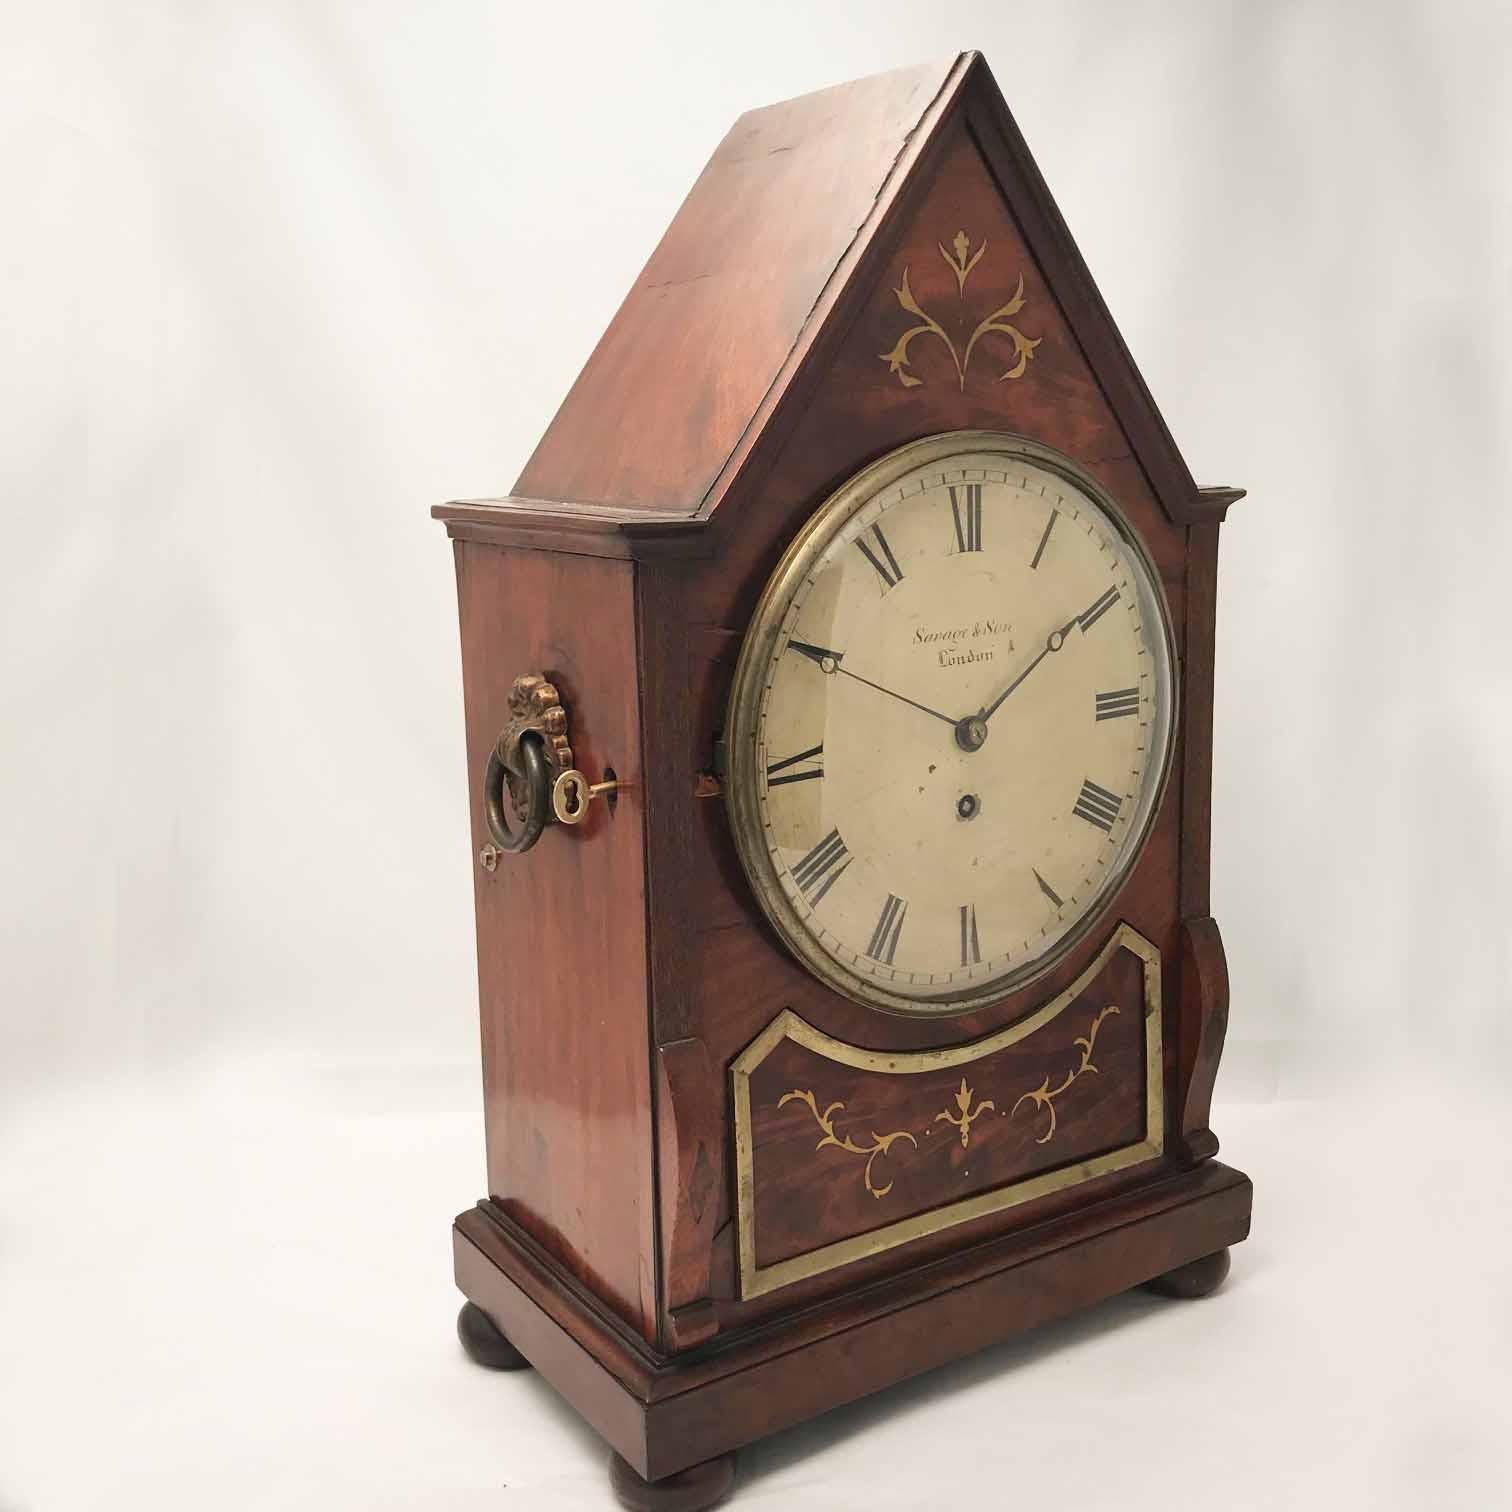 English British/Canadian Eight Day Mantel Timepiece in Mahogany and Cut-Brass Case